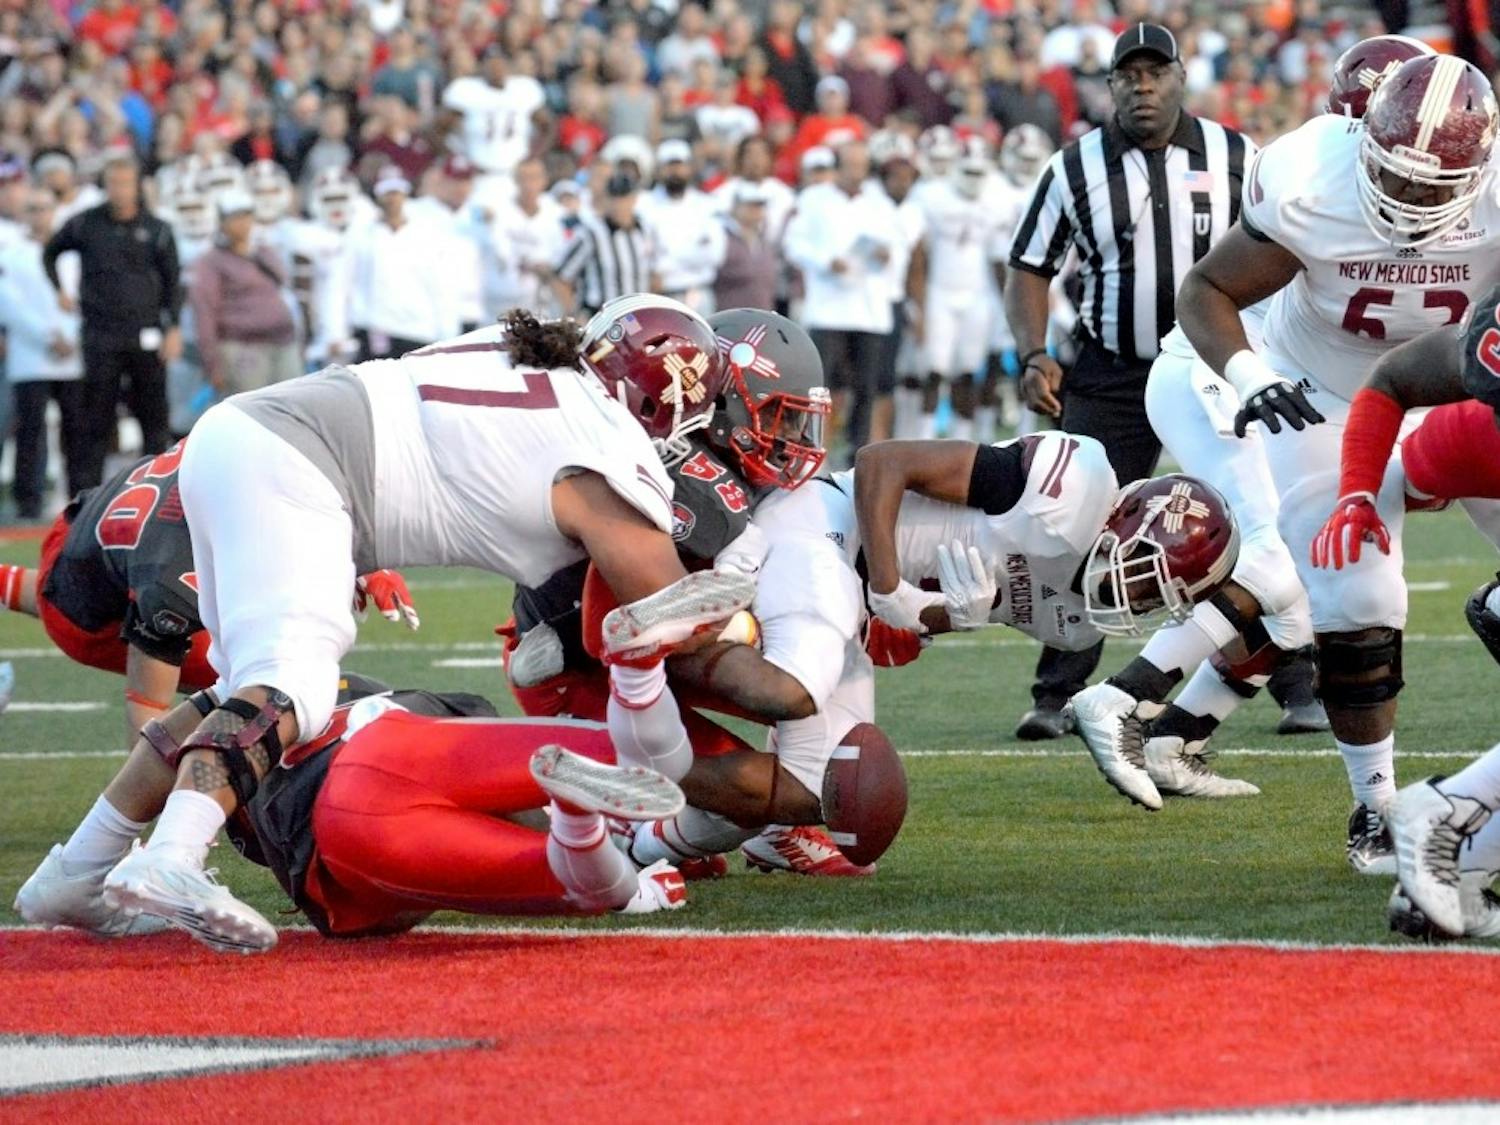 Lobo linebacker Maurice Daniels (58) brings down NMSU running back Larry Rose III, resulting in a fumble recovery and touchdown for UNM. The Lobos play Hawai’i on Saturday at University Stadium.